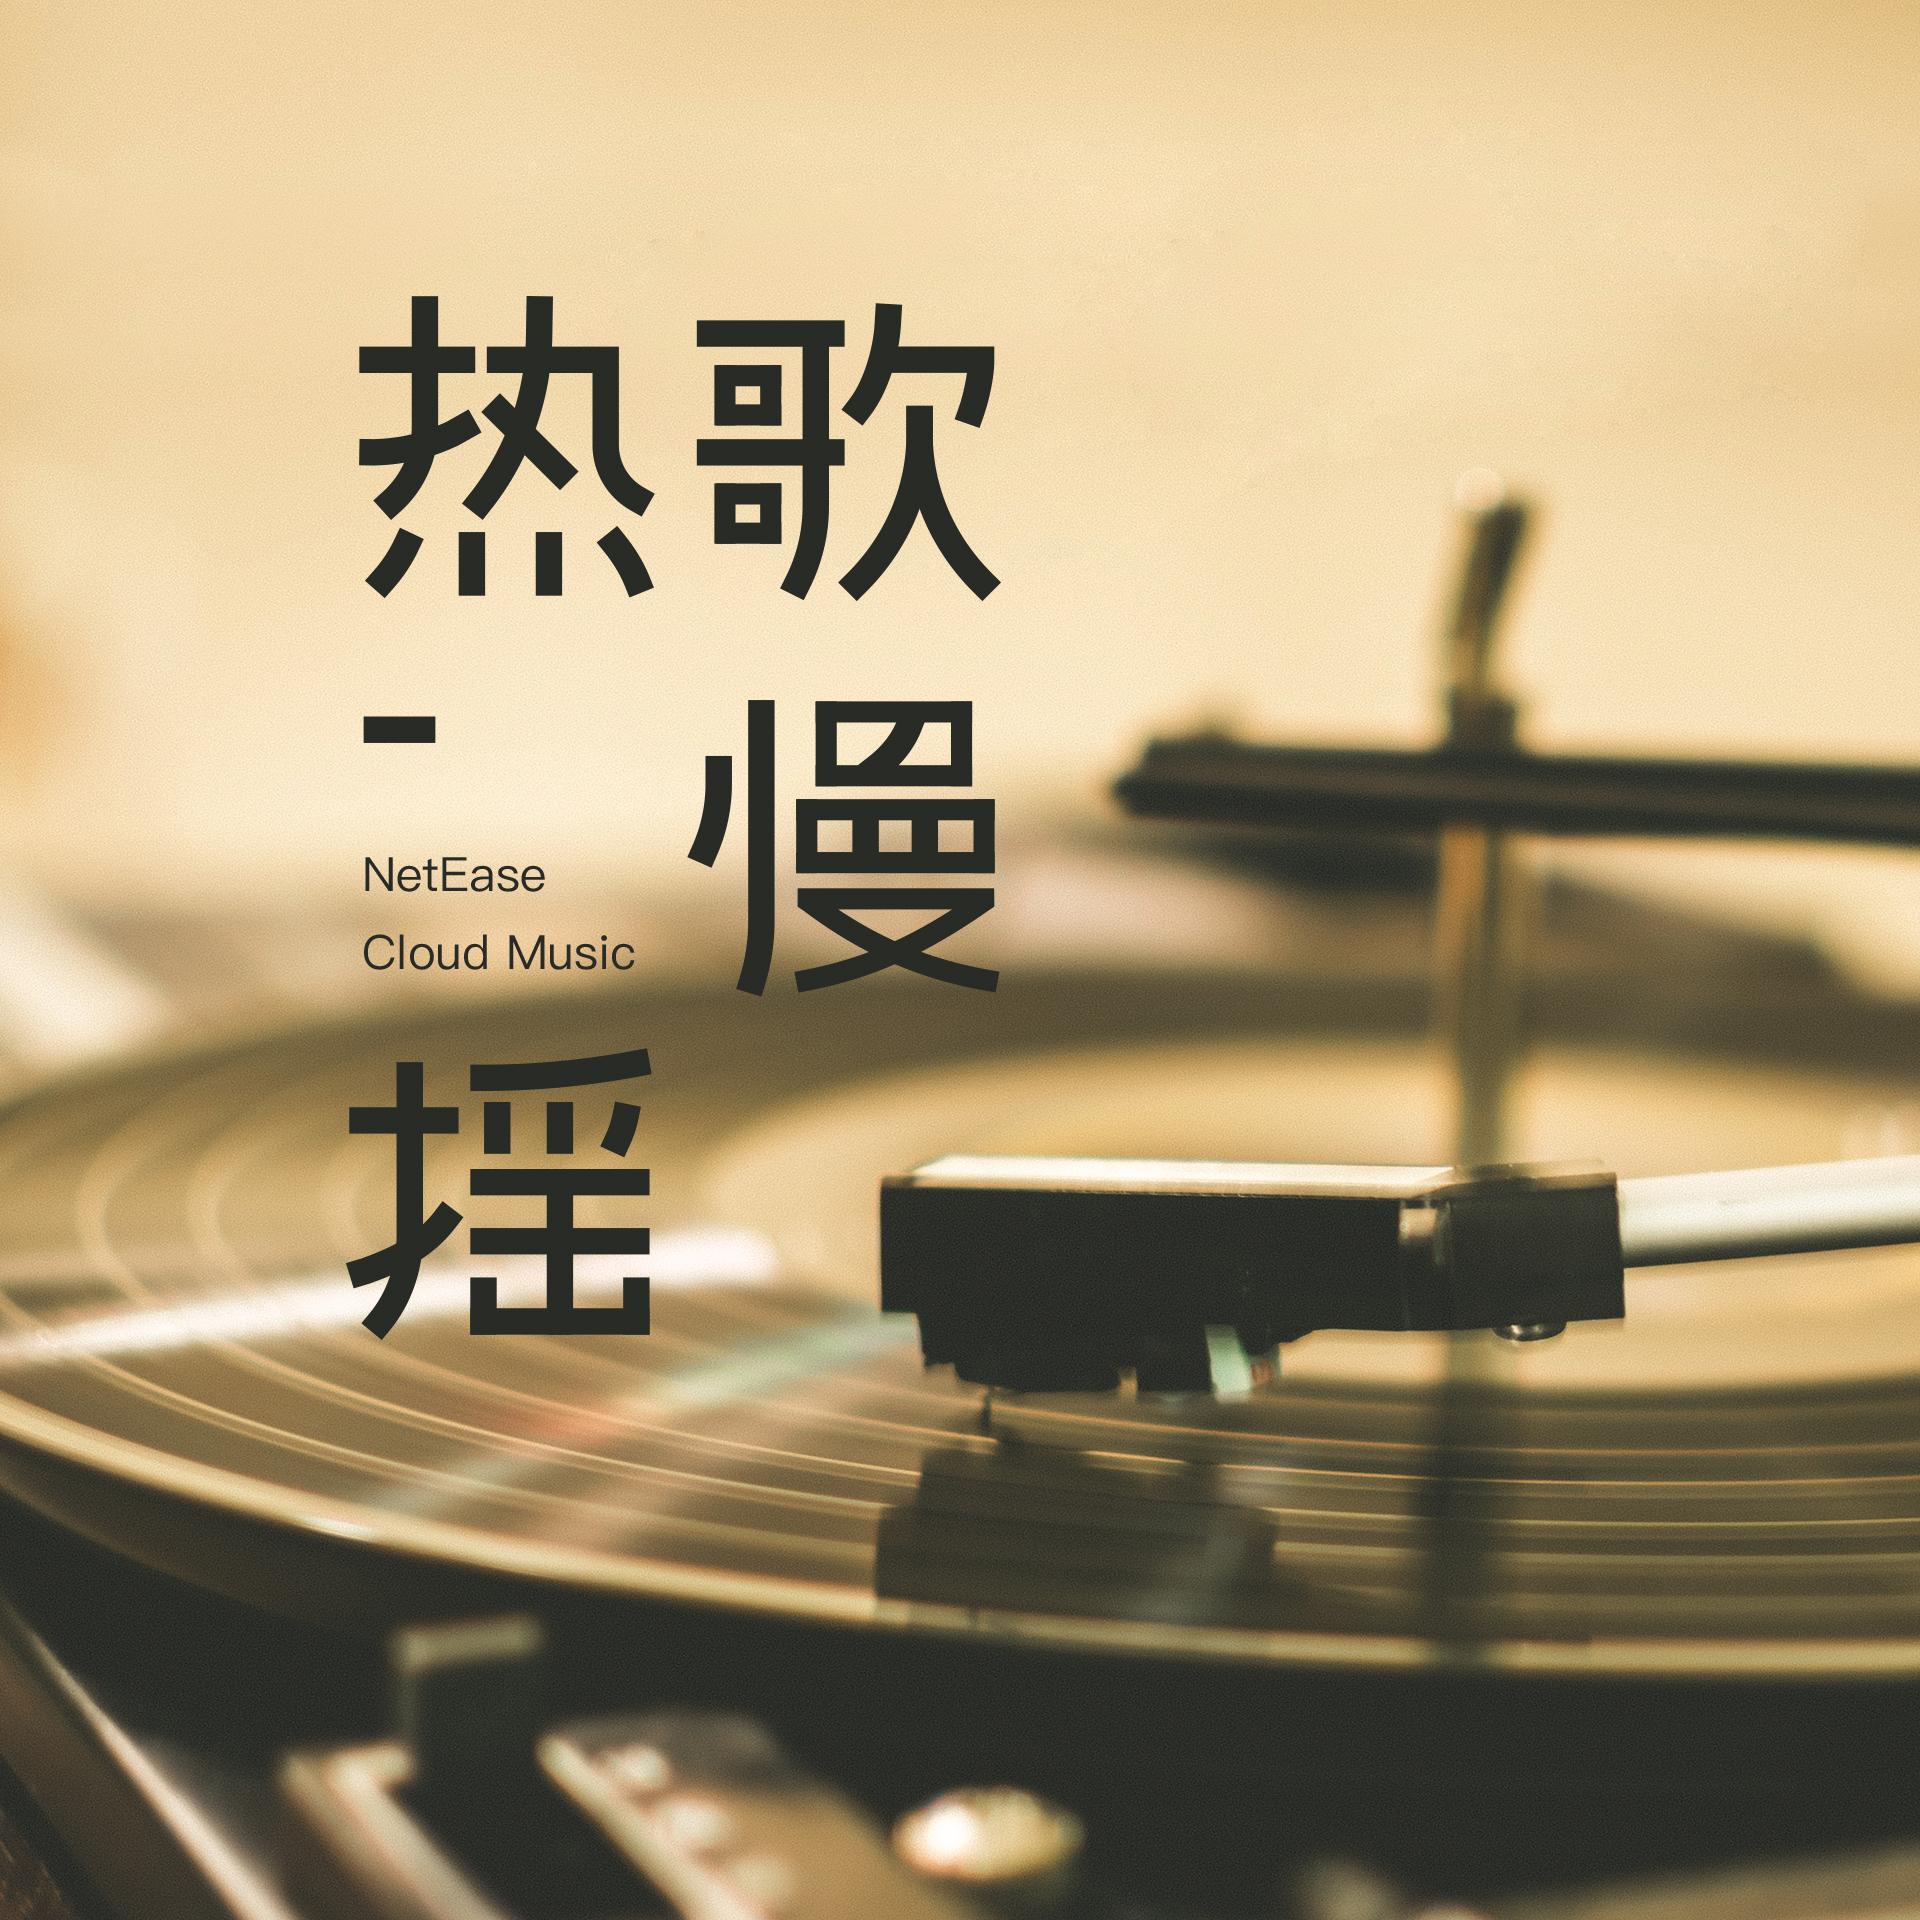 Set Fire to the Love Song歌词 歌手Various Artists-专辑最新热歌慢摇93-单曲《Set Fire to the Love Song》LRC歌词下载